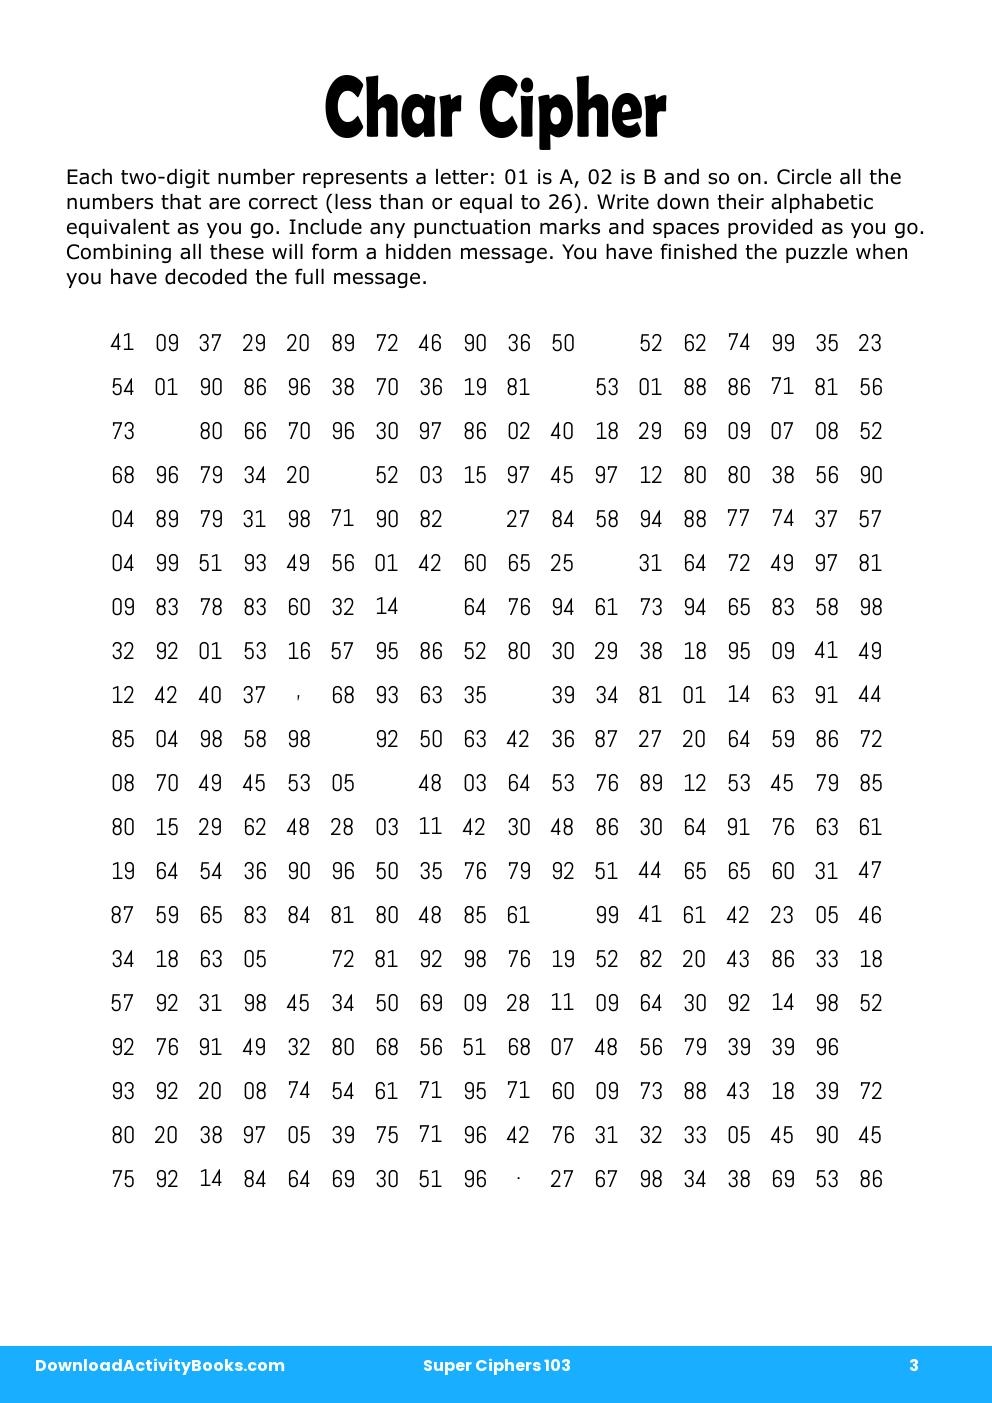 Char Cipher in Super Ciphers 103